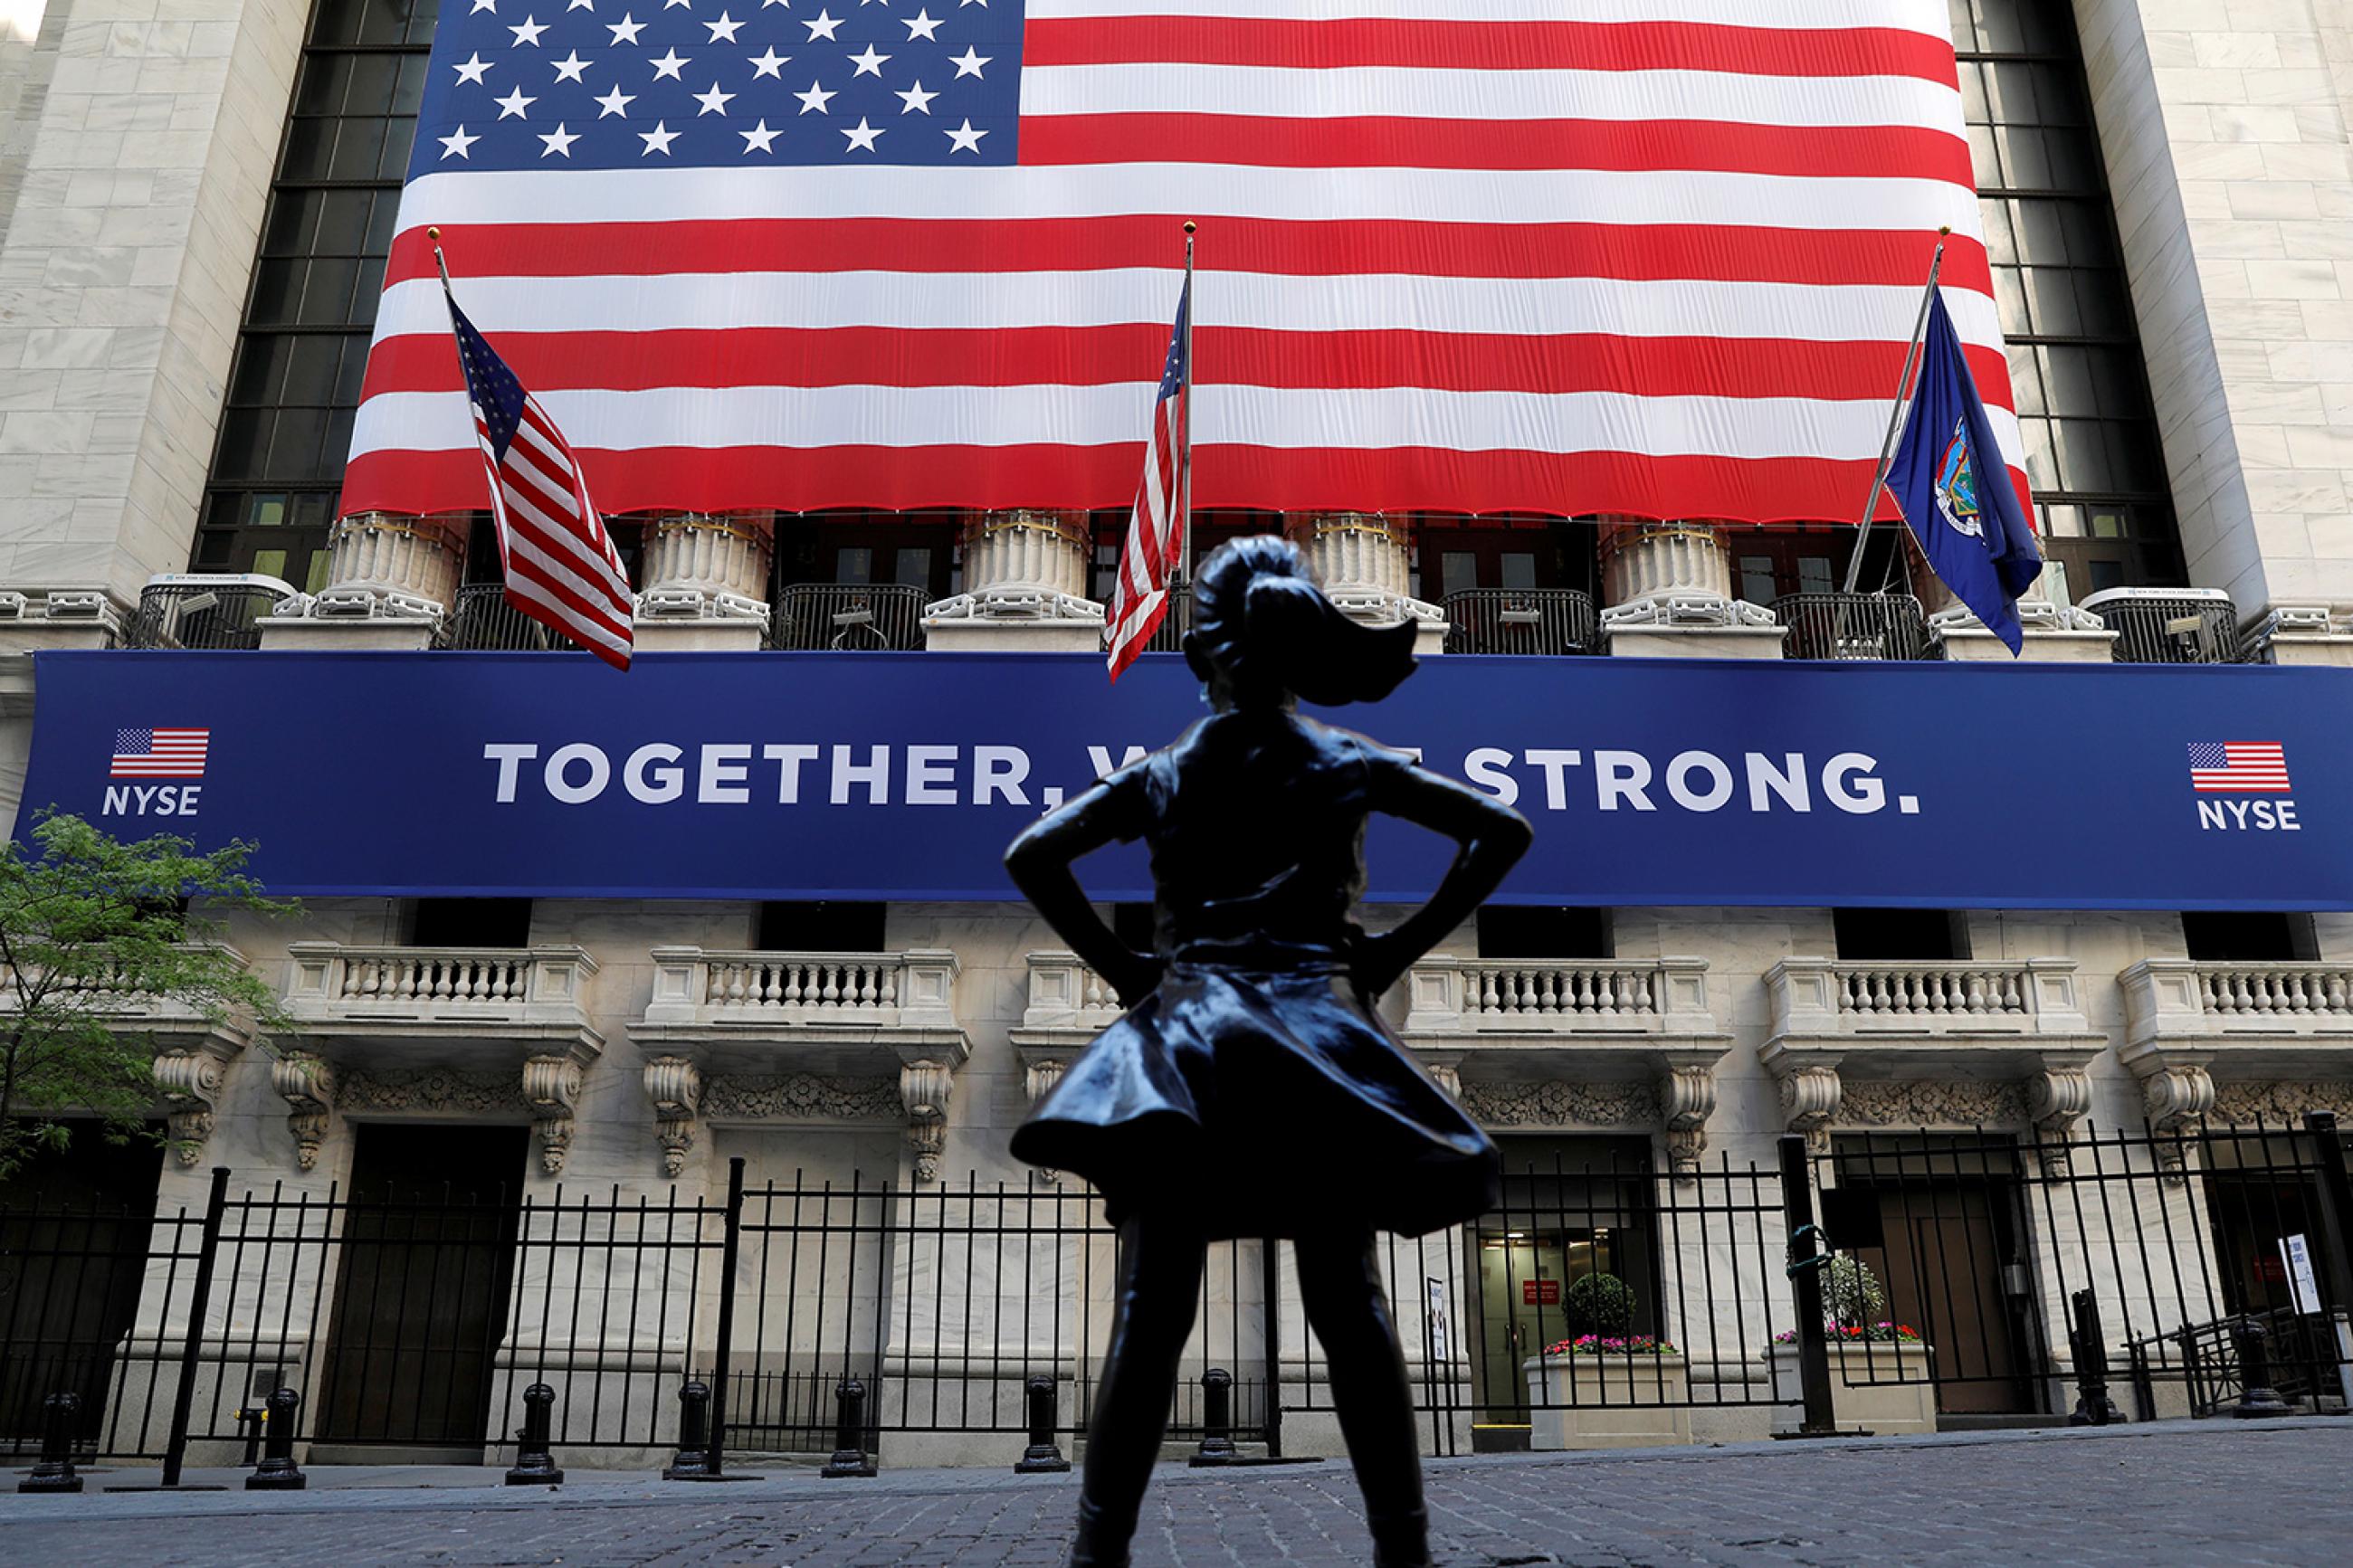 The "Fearless Girl" statue is seen outside the New York Stock Exchange following first trading session since its March coronavirus lockdown in the Manhattan borough of New York City on May 26, 2020. The photo shows the statue with a huge American flag in the background. REUTERS/Mike Segar